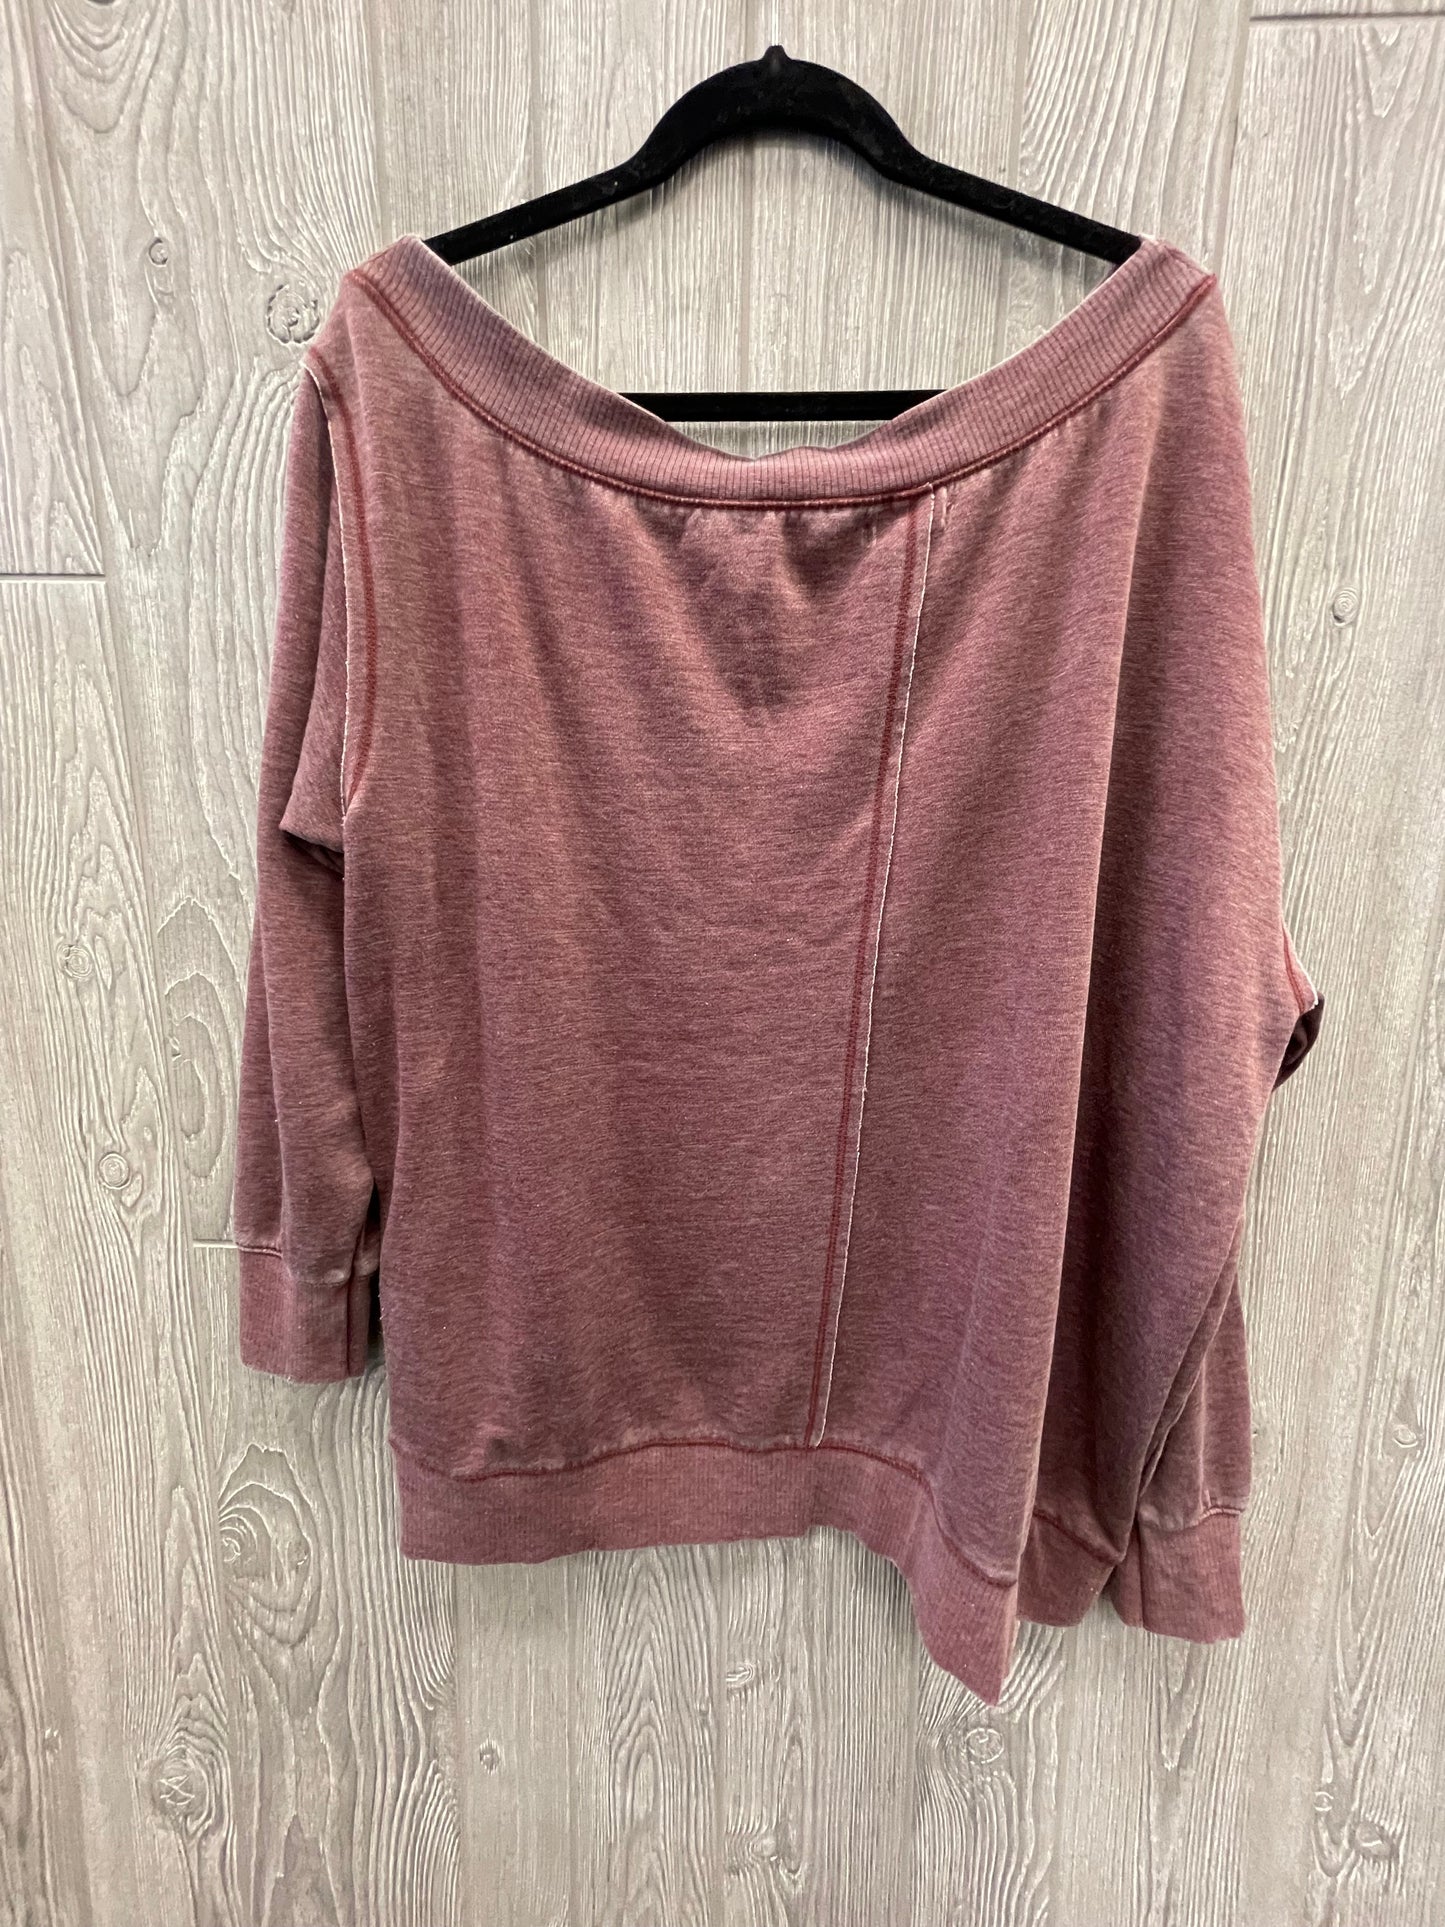 Purple Top Long Sleeve Maurices, Size 1x